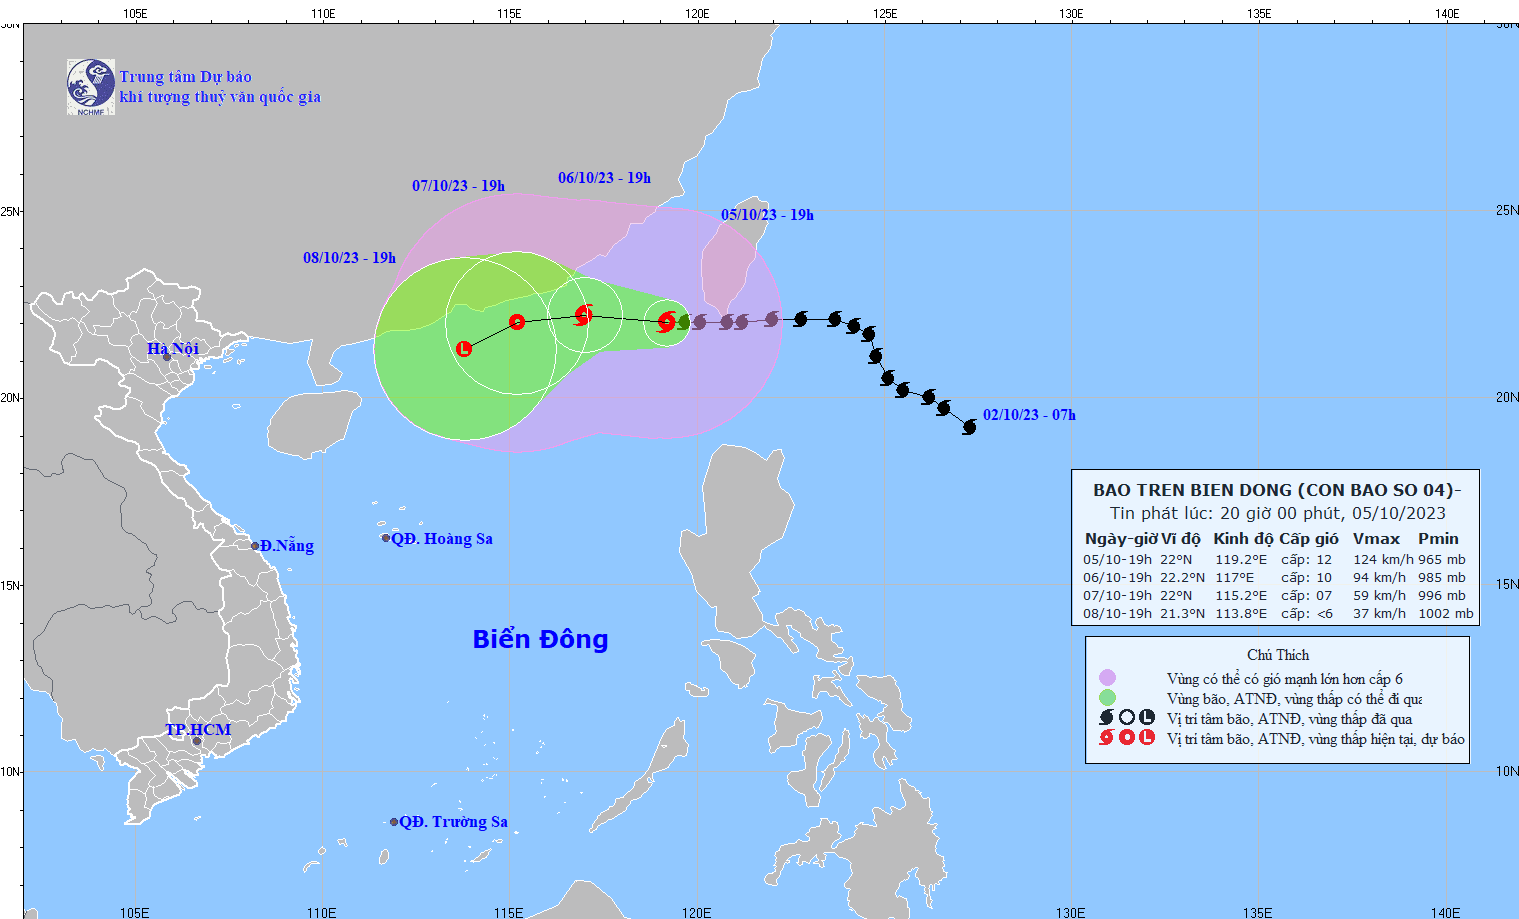 Typhoon Koinu - Typhoon No. 03 in Vietnam in 2023. Credits to Vietnam National Center for Hydro-Meteorological Forecasting with Sincere Thanks